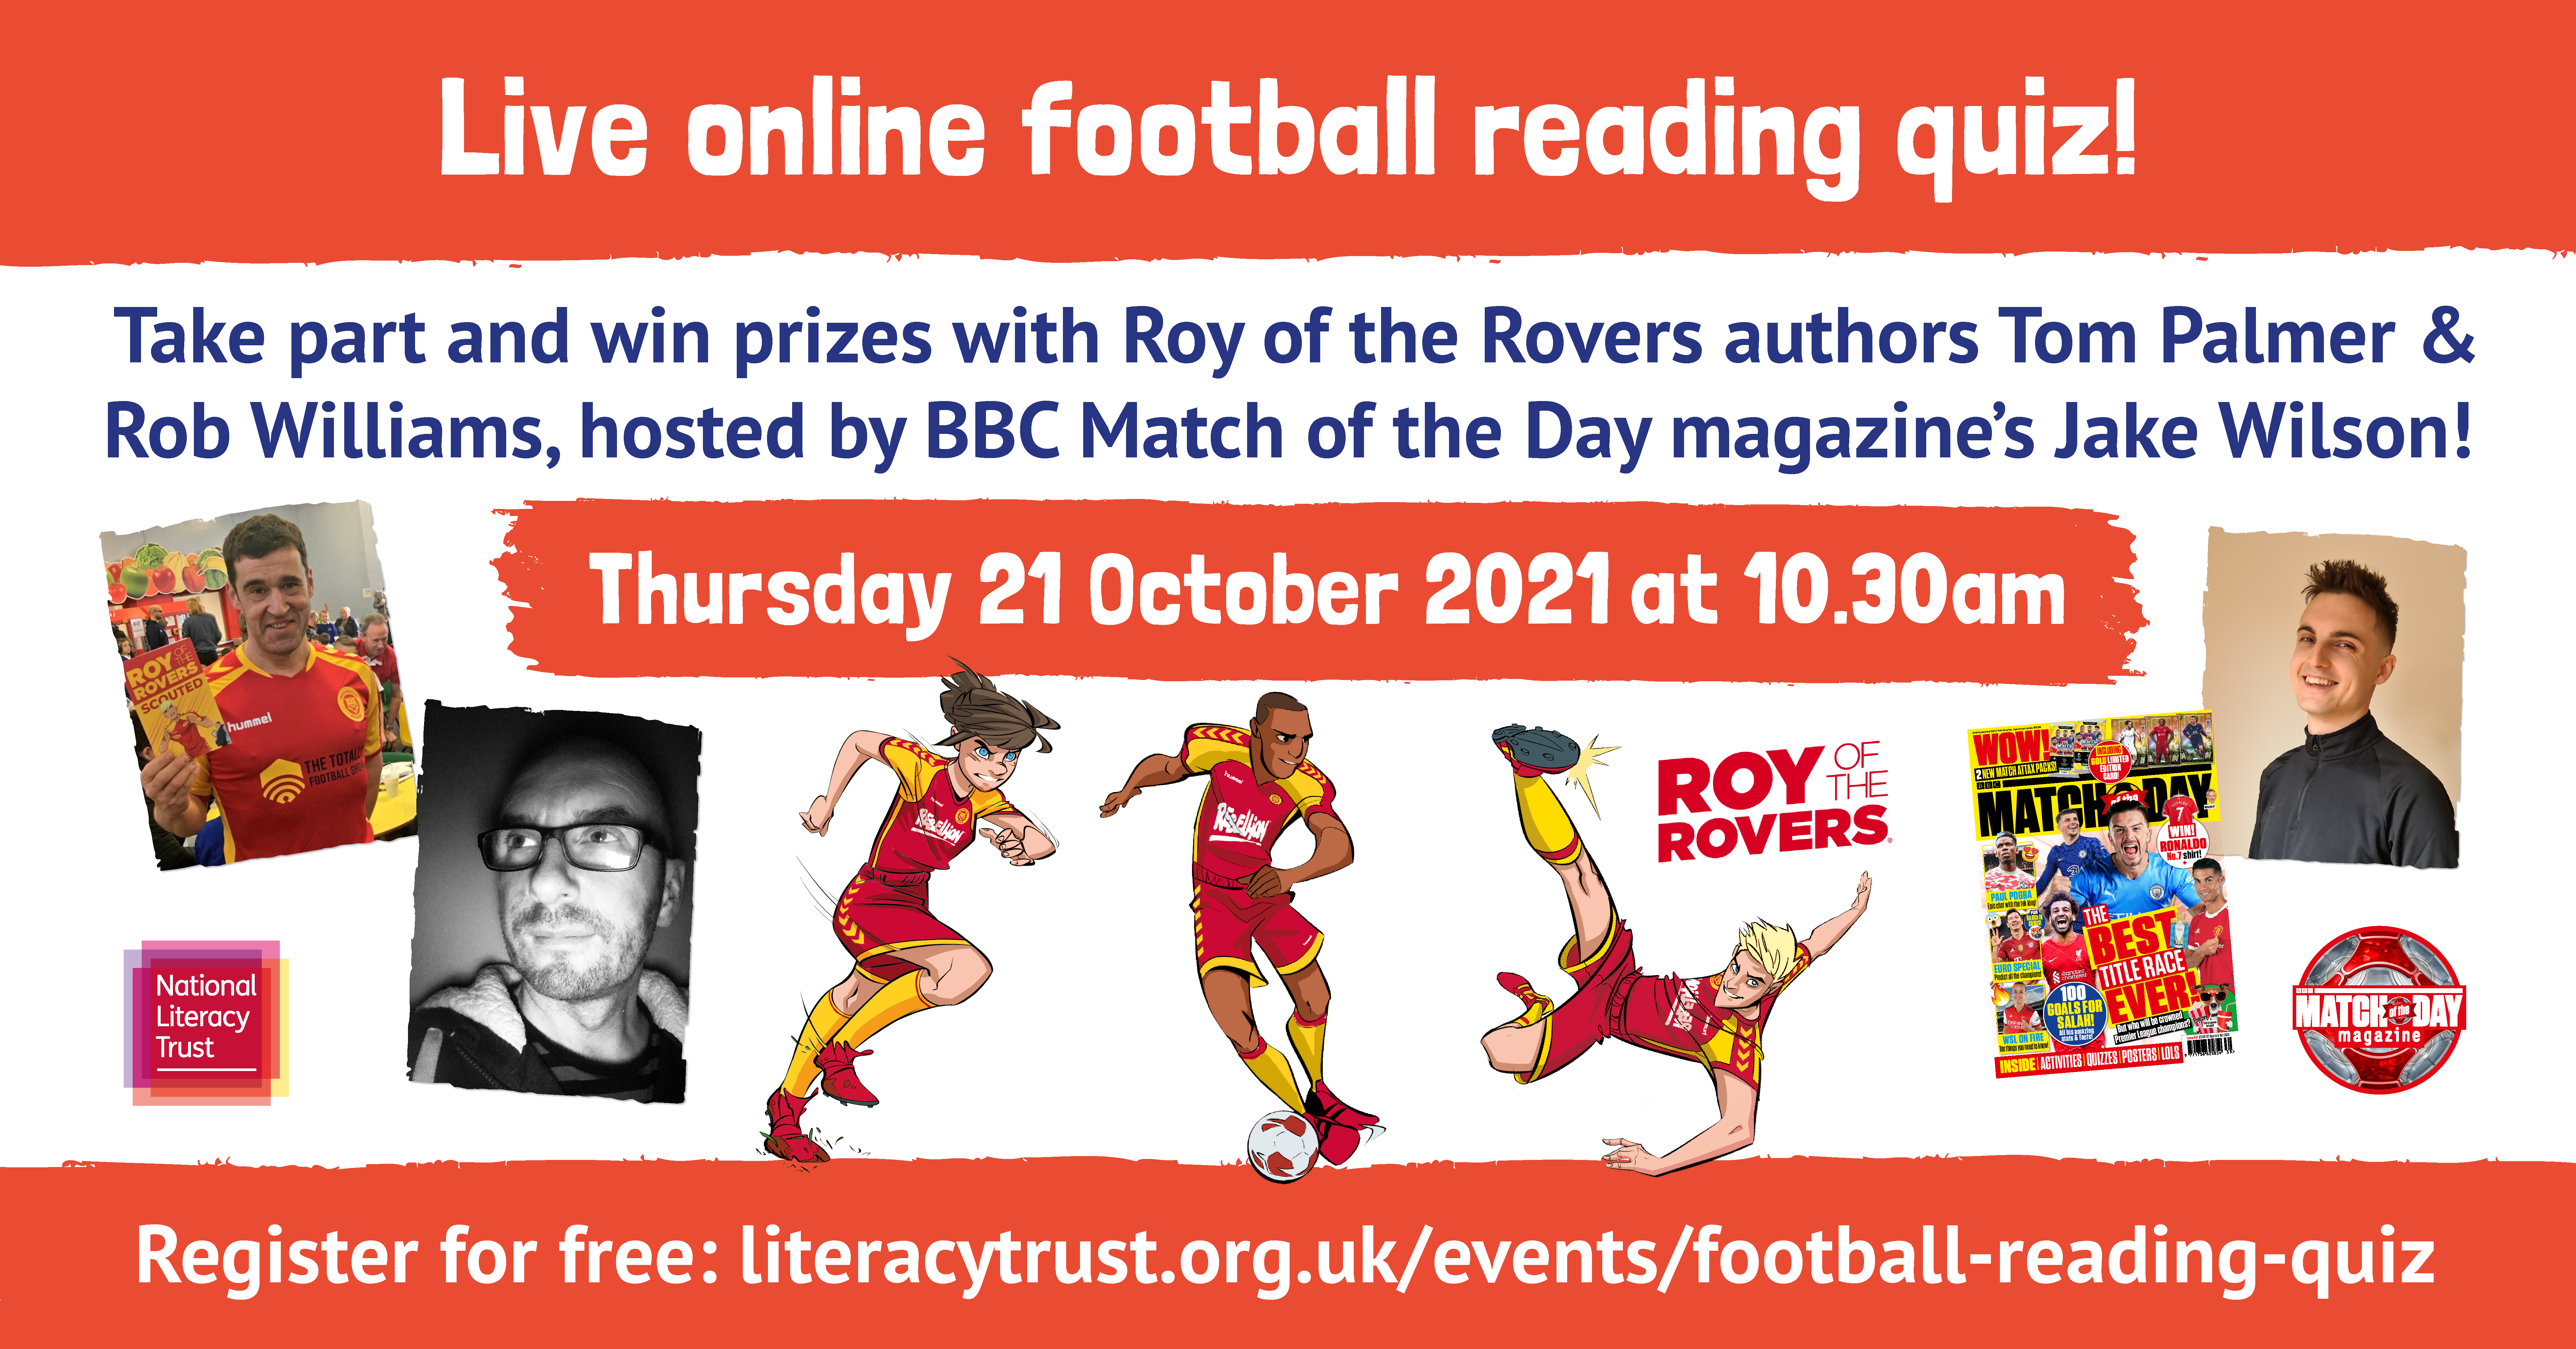 We team up with Roy of the Rovers to donate 5,000 books and host an online footy quiz for 15,000 pupils! National Literacy Trust